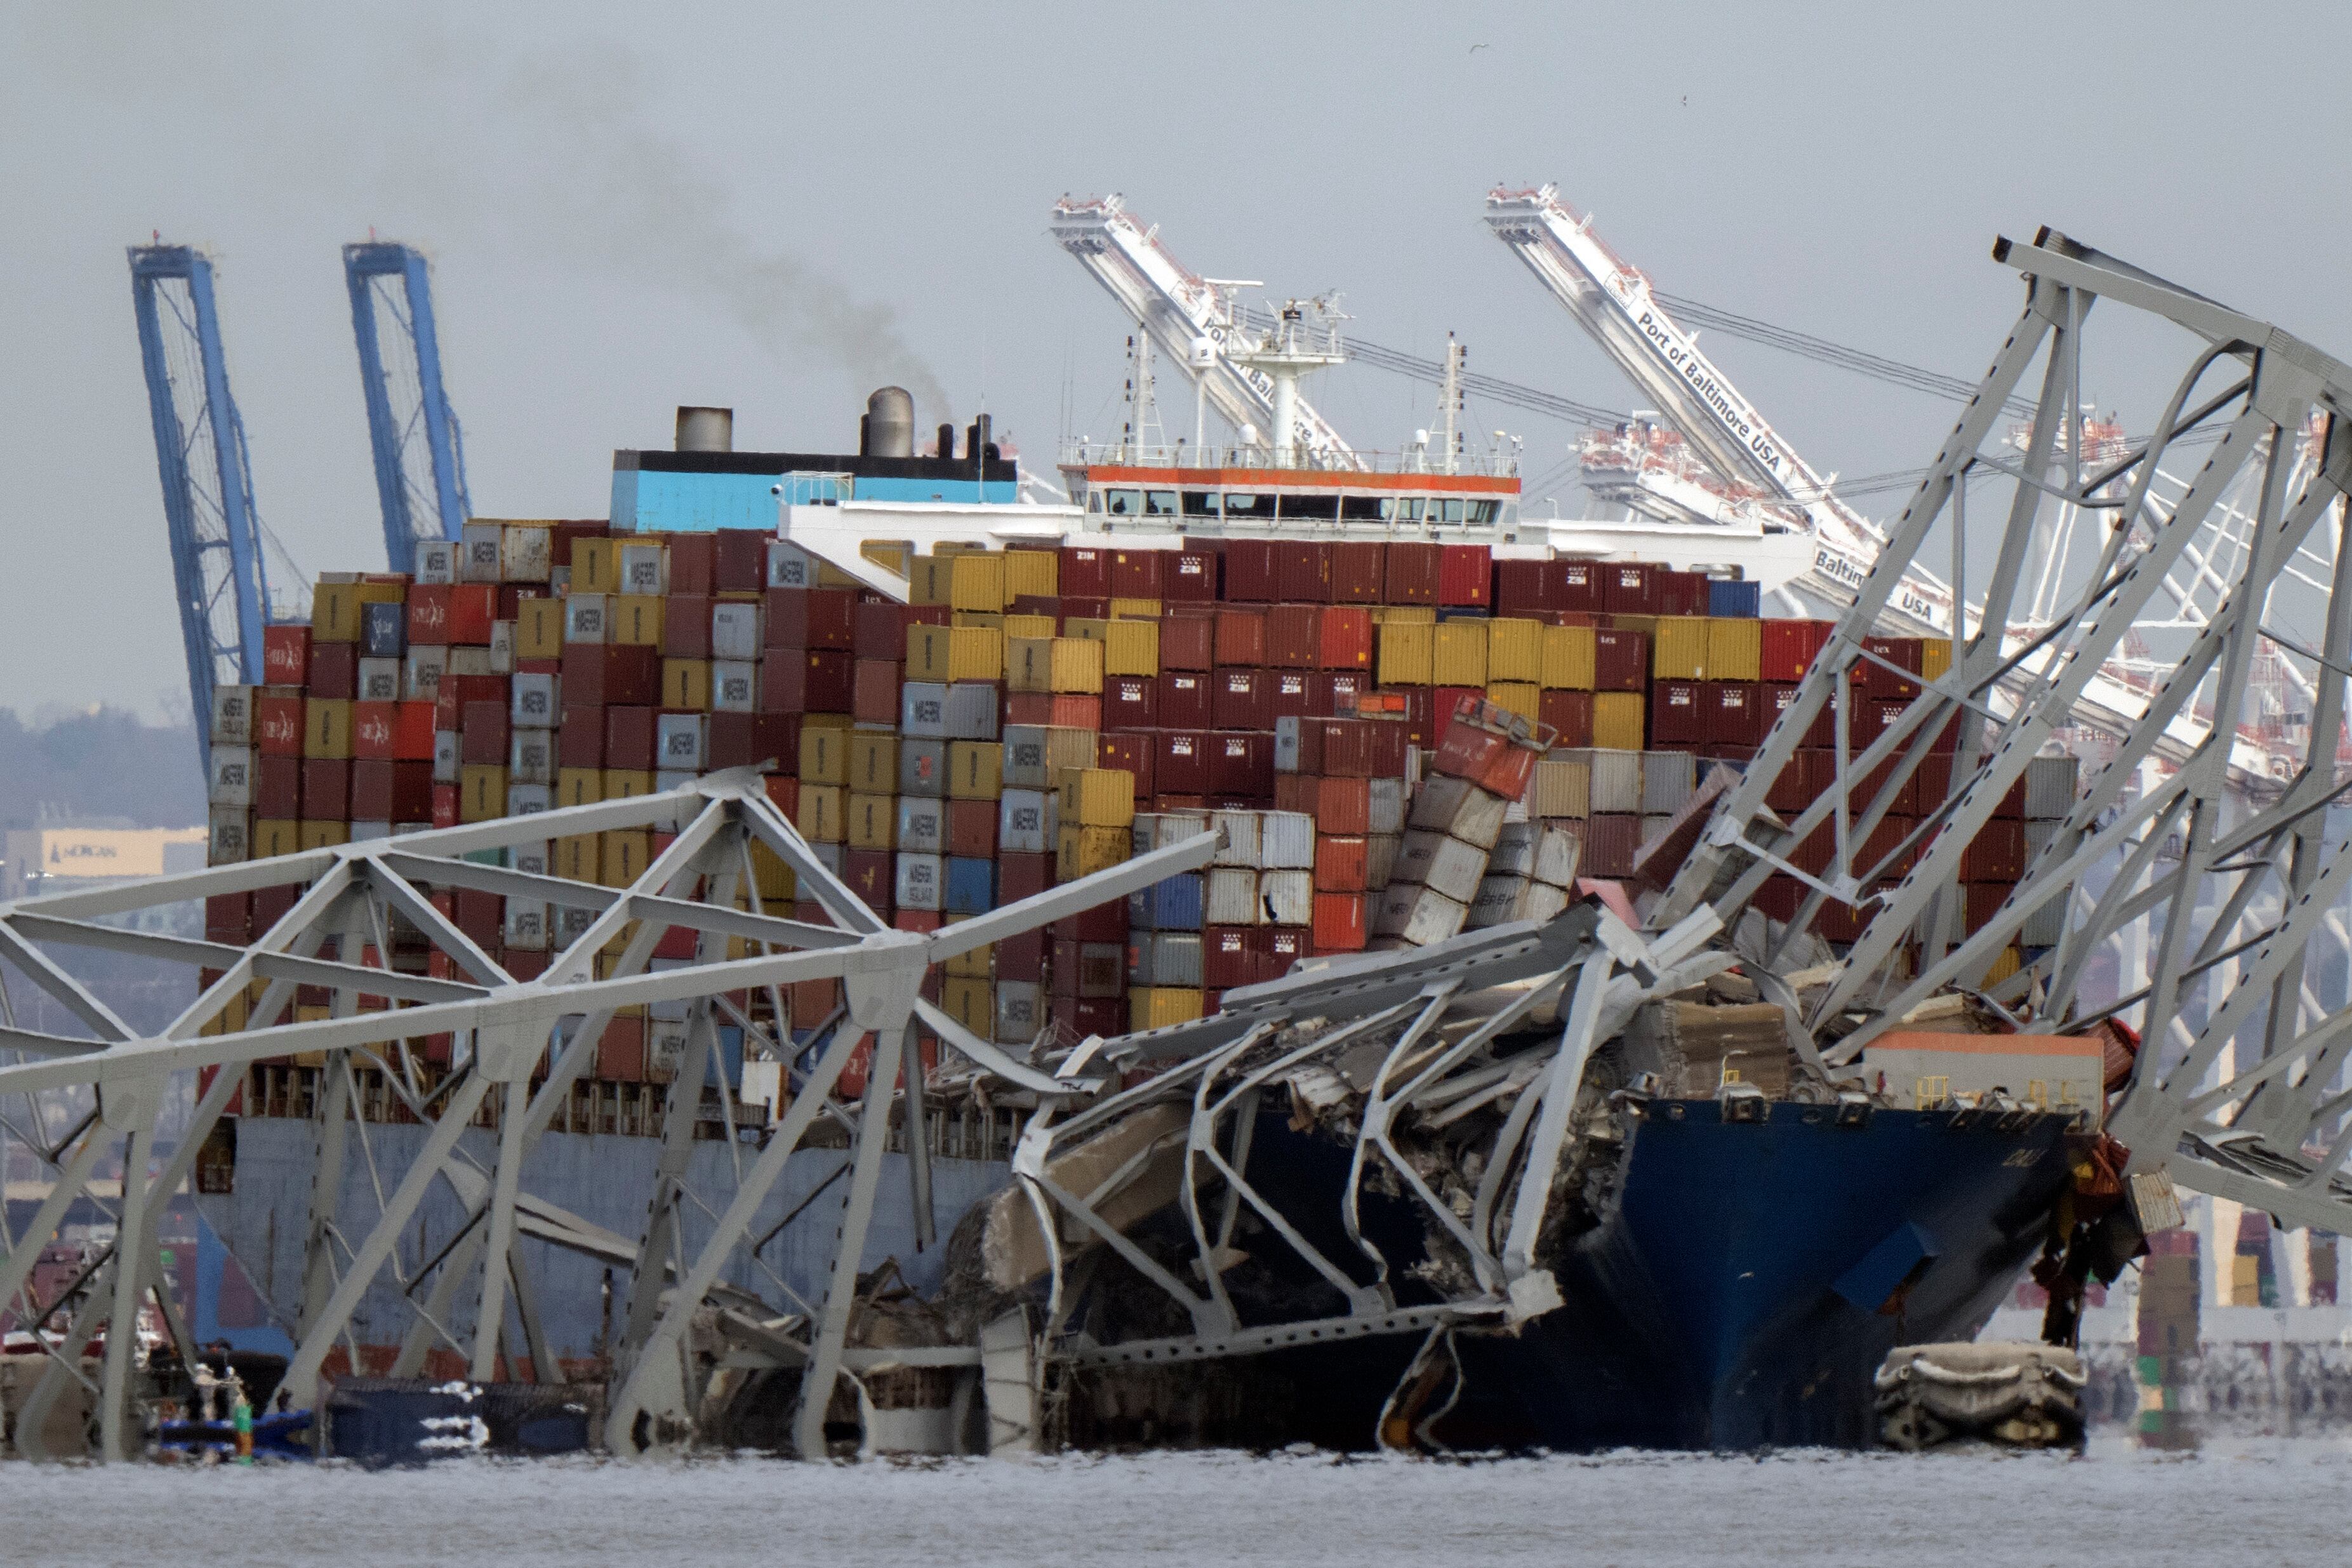 Cargo ship lost power and issued mayday before hitting Baltimore bridge, governor says